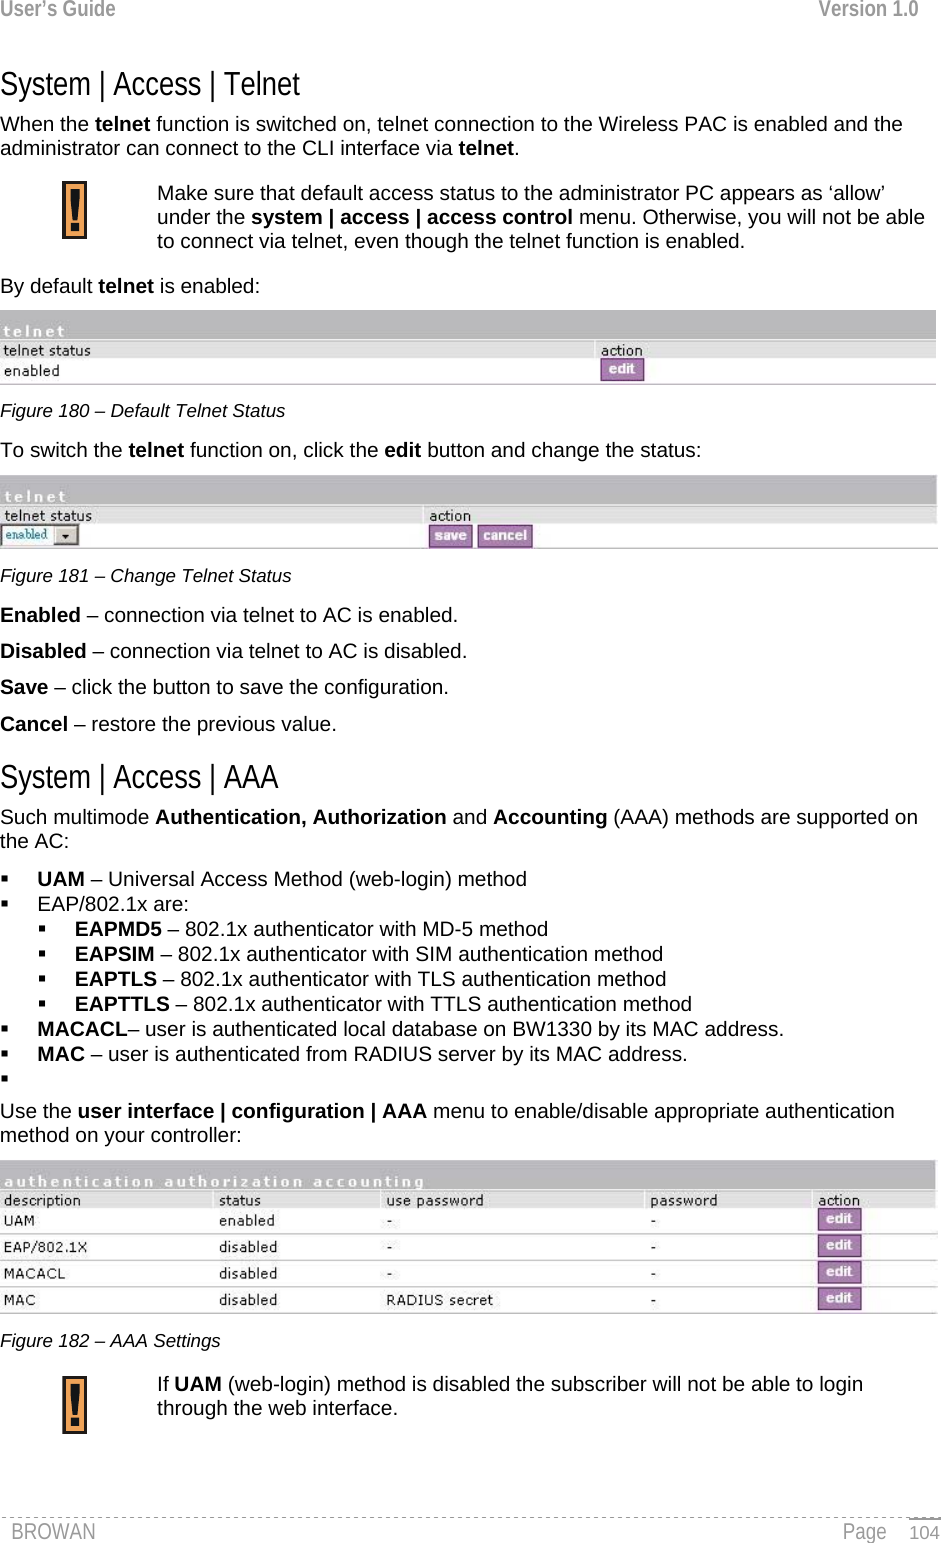 User’s Guide  Version 1.0  System | Access | Telnet When the telnet function is switched on, telnet connection to the Wireless PAC is enabled and the administrator can connect to the CLI interface via telnet. Make sure that default access status to the administrator PC appears as ‘allow’ under the system | access | access control menu. Otherwise, you will not be able to connect via telnet, even though the telnet function is enabled.  By default telnet is enabled:  Figure 180 – Default Telnet Status To switch the telnet function on, click the edit button and change the status:  Figure 181 – Change Telnet Status Enabled – connection via telnet to AC is enabled. Disabled – connection via telnet to AC is disabled. Save – click the button to save the configuration. Cancel – restore the previous value. System | Access | AAA  Such multimode Authentication, Authorization and Accounting (AAA) methods are supported on the AC:  UAM – Universal Access Method (web-login) method  EAP/802.1x are:  EAPMD5 – 802.1x authenticator with MD-5 method  EAPSIM – 802.1x authenticator with SIM authentication method  EAPTLS – 802.1x authenticator with TLS authentication method  EAPTTLS – 802.1x authenticator with TTLS authentication method  MACACL– user is authenticated local database on BW1330 by its MAC address.  MAC – user is authenticated from RADIUS server by its MAC address.   Use the user interface | configuration | AAA menu to enable/disable appropriate authentication method on your controller:  Figure 182 – AAA Settings If UAM (web-login) method is disabled the subscriber will not be able to login through the web interface.  BROWAN                                                                                                                                               Page   104